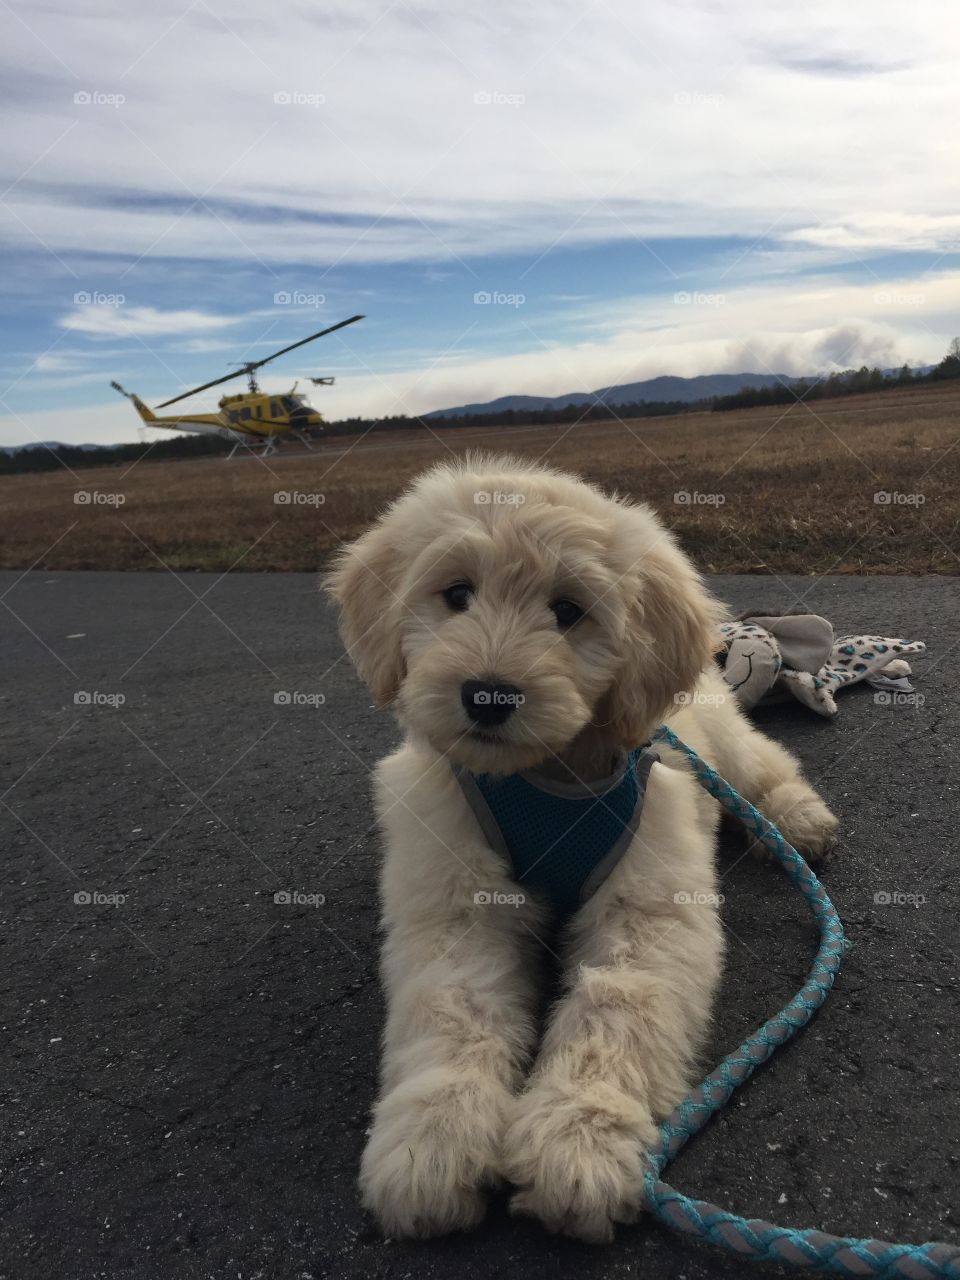 Puppy and helicopter 